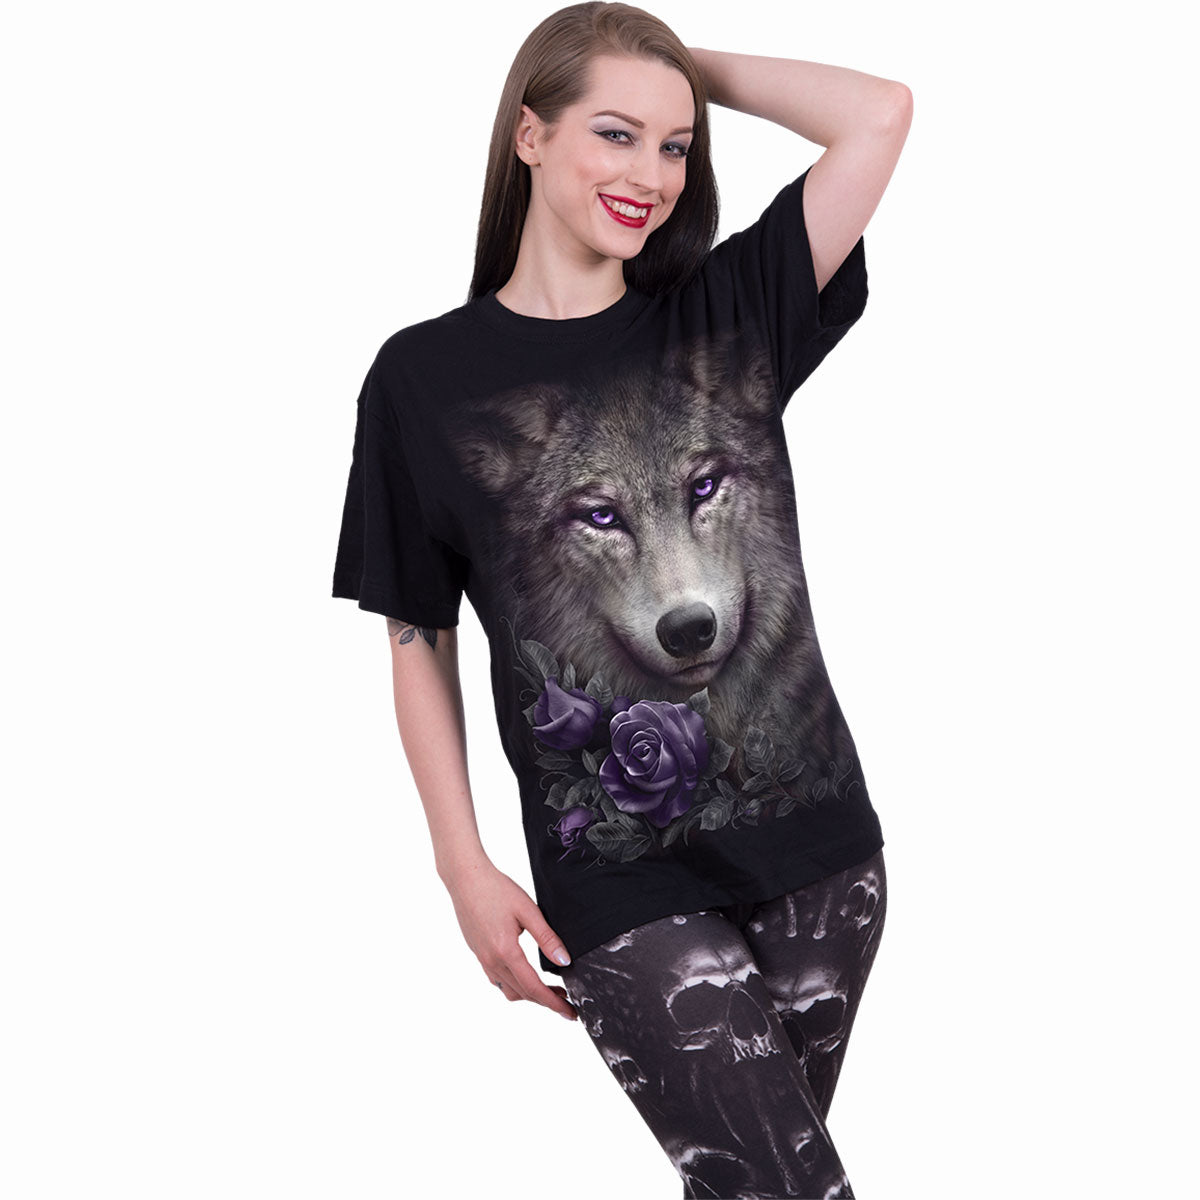 WOLF ROSES - Front Print T-Shirt Black